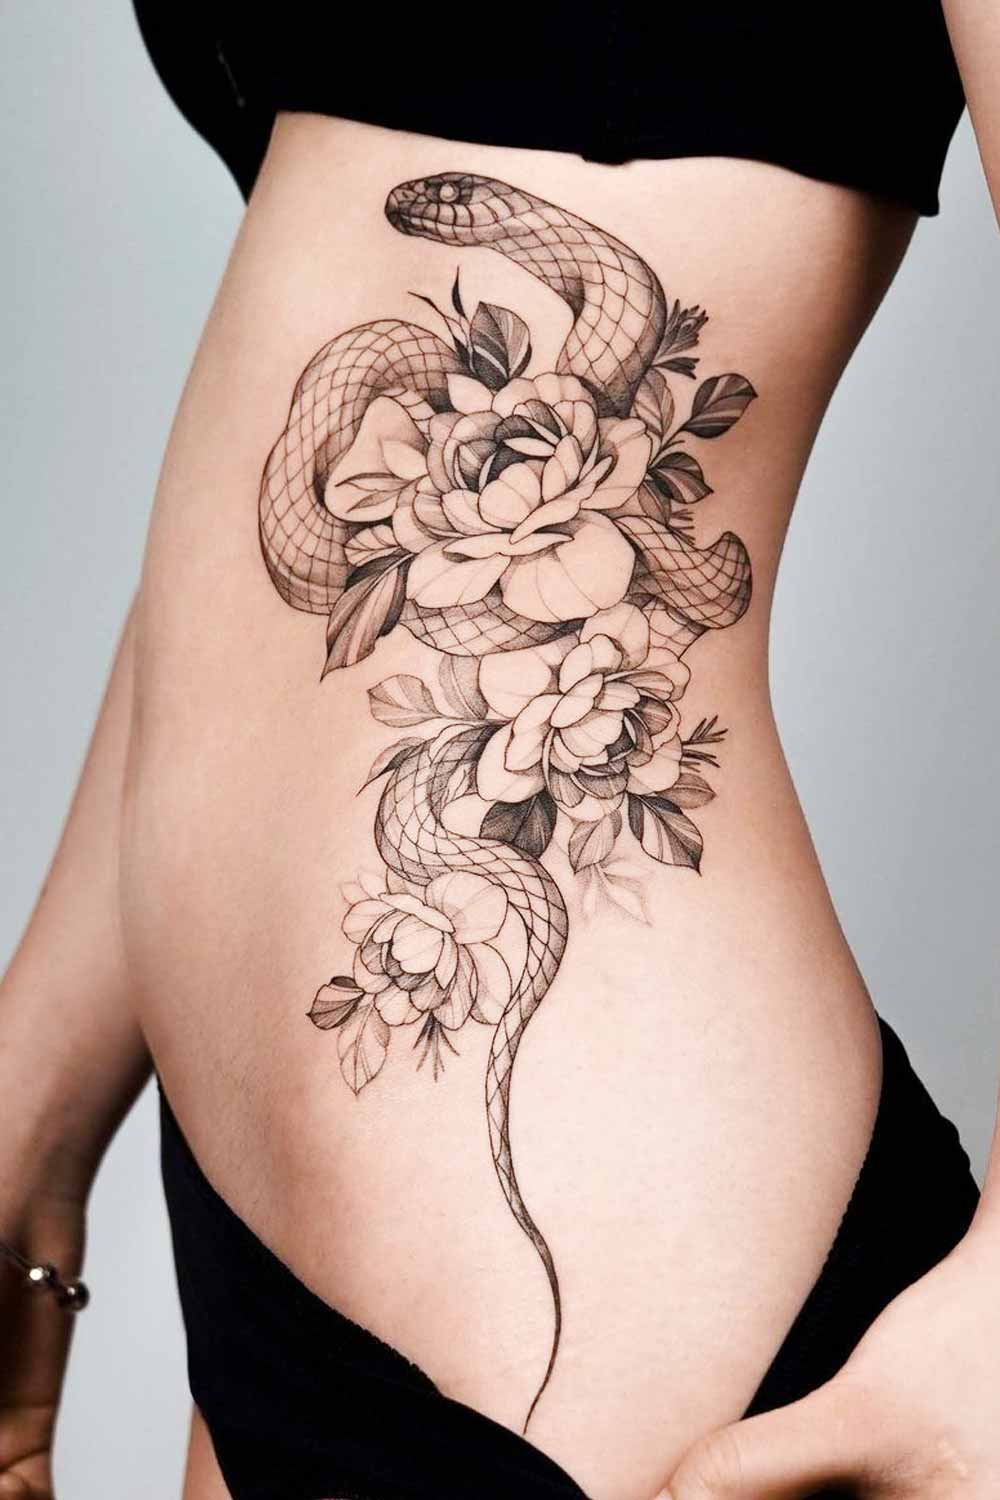 Side Body Snake with Flowers Tattoo Design